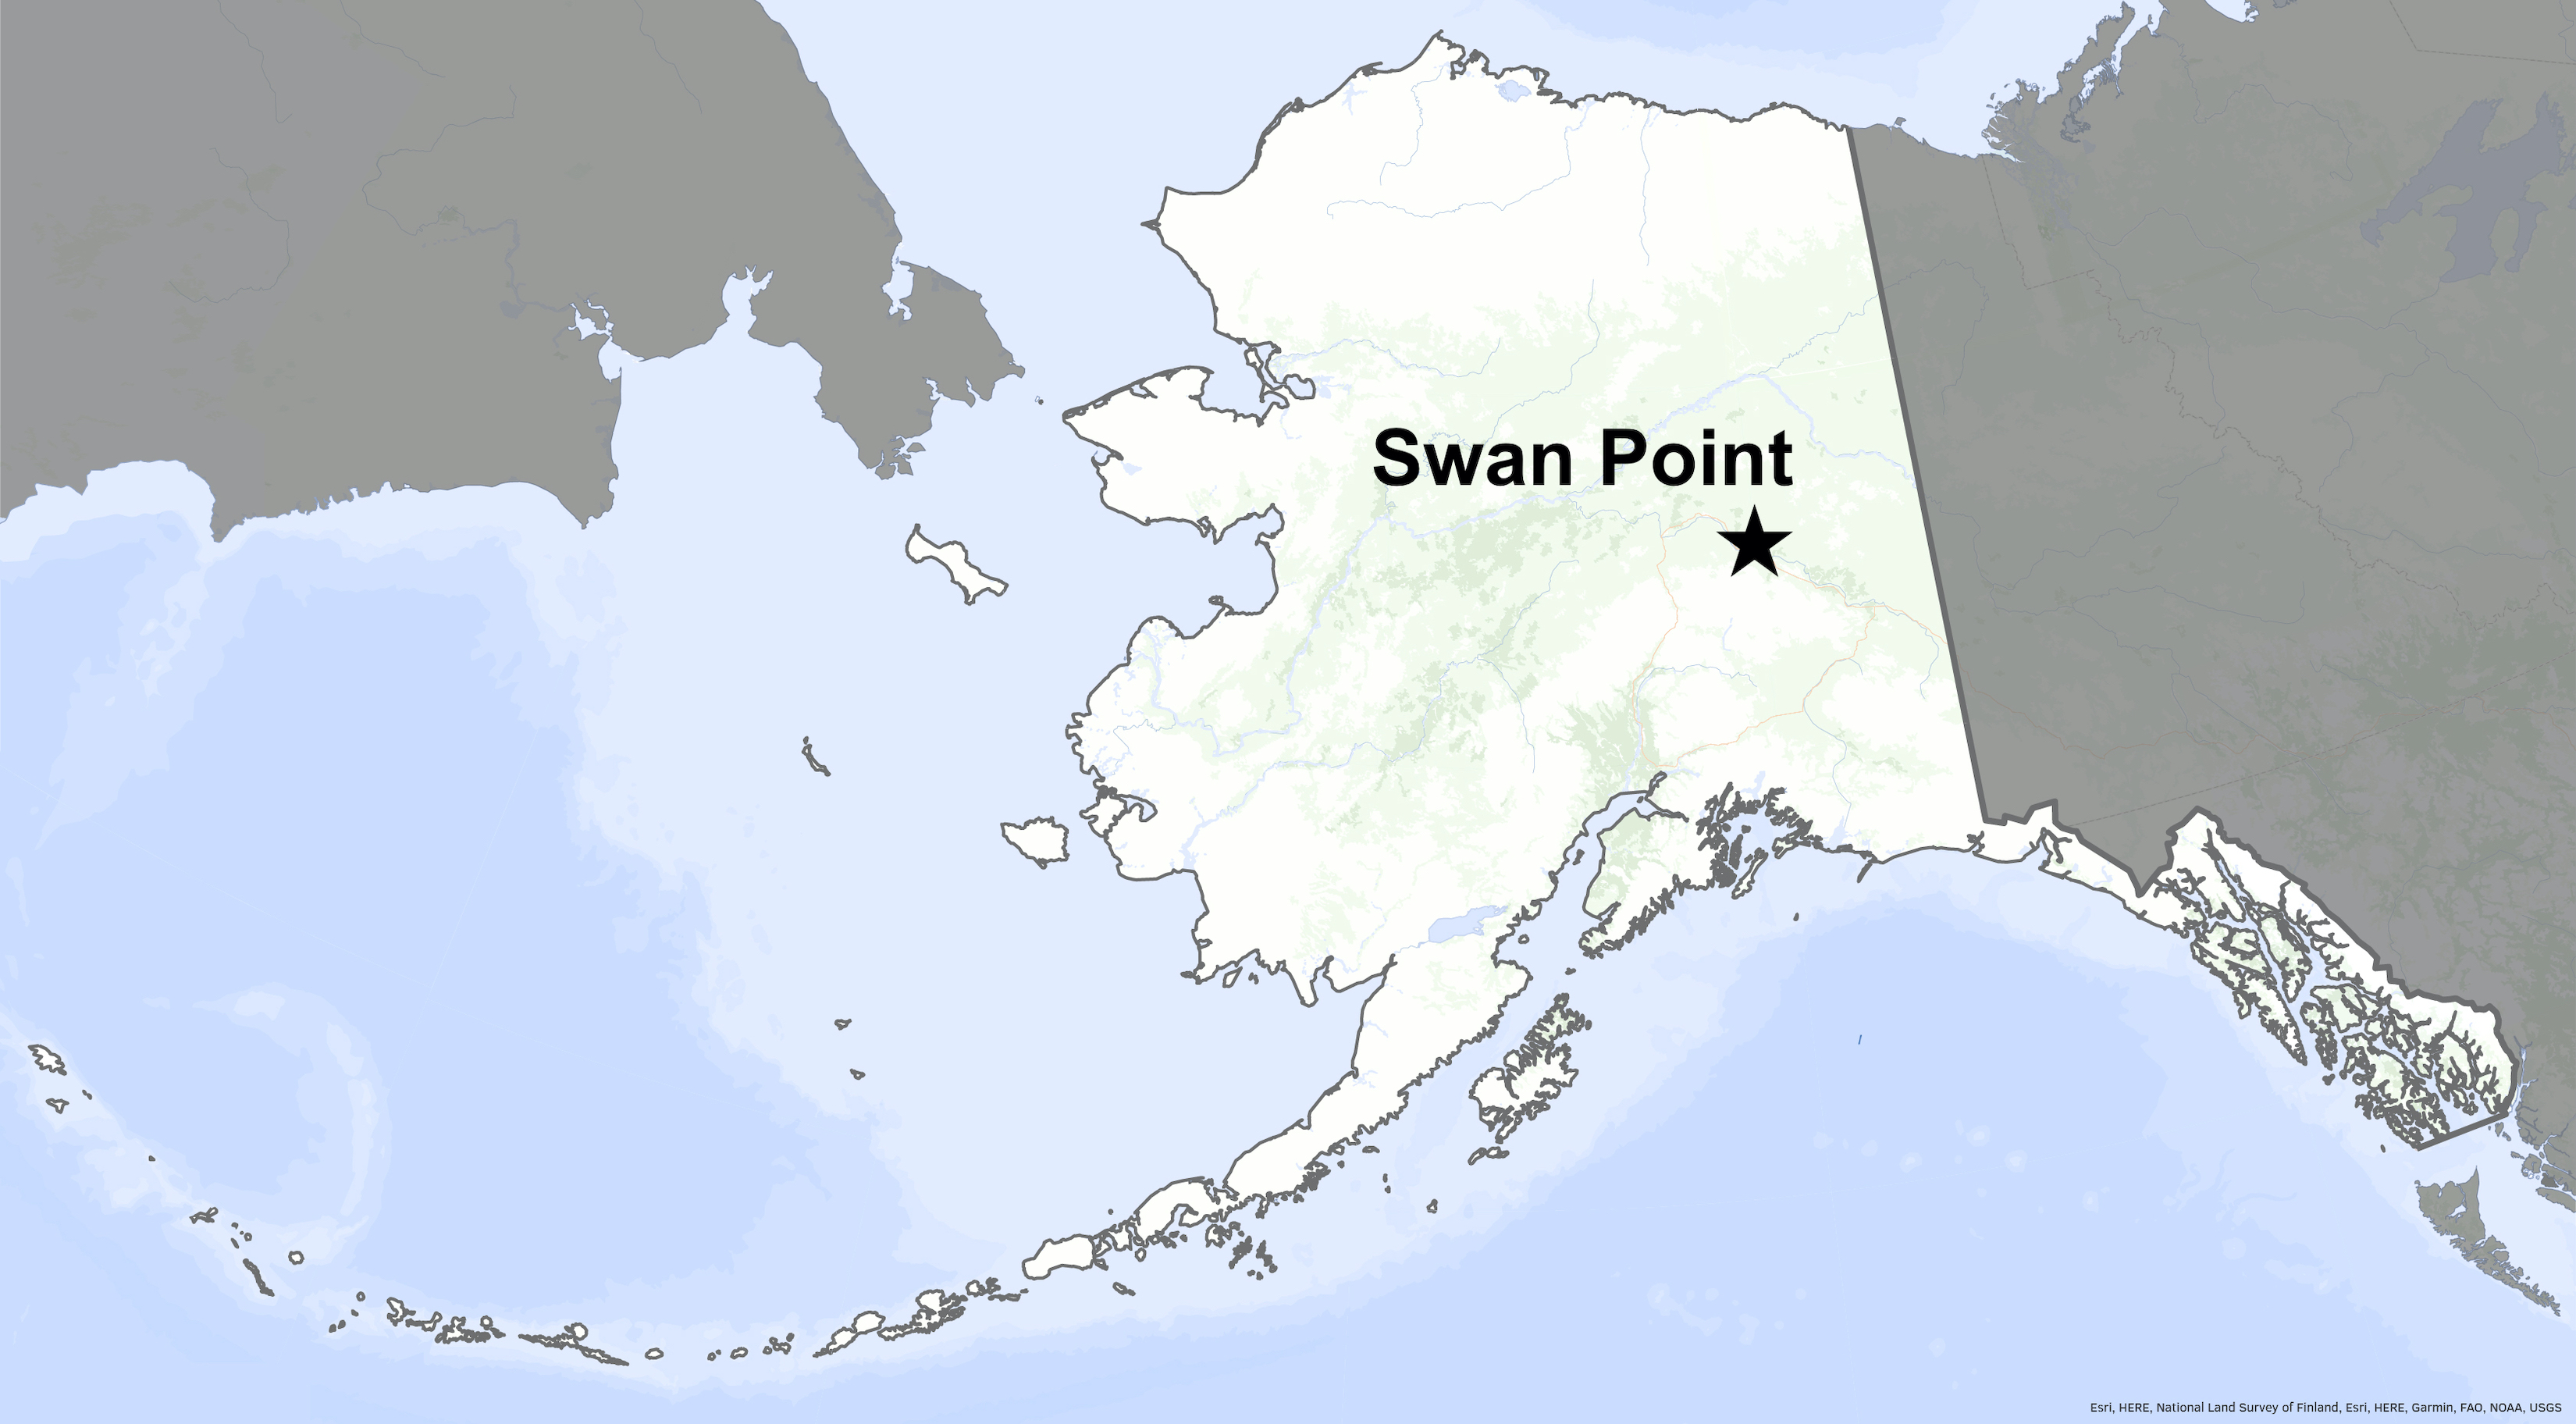 A star on a map of Alaska denotes the location of Swan Point.